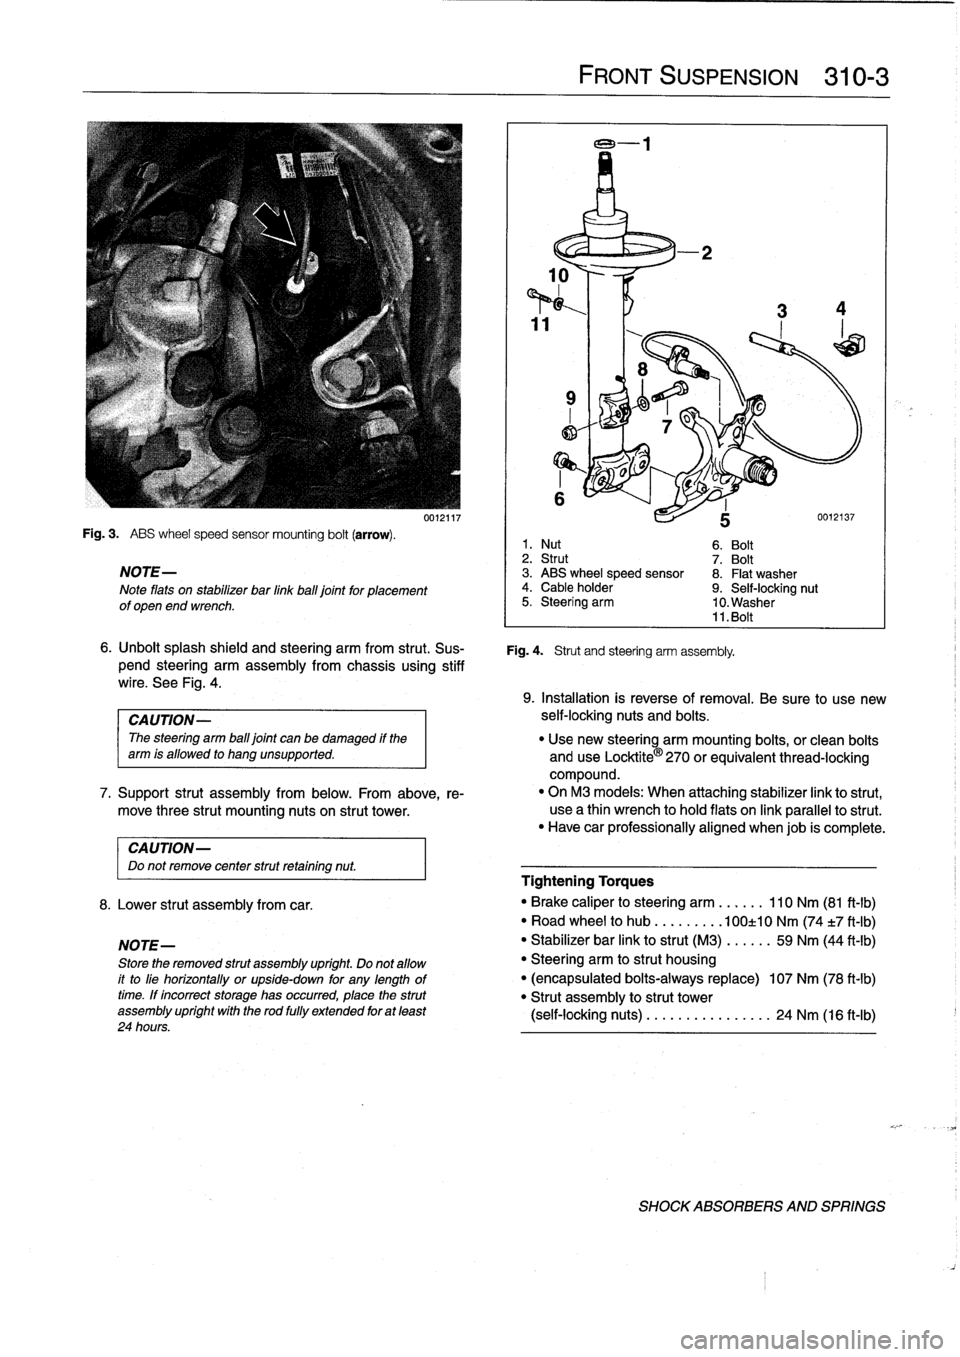 BMW 328i 1994 E36 Workshop Manual 
Fig
.
3
.

	

ABS
wheel
speed
sensor
mounting
bolt
(arrow)
.

NOTE-

Note
flats
on
stabilizer
bar
linkball
joint
for
placement
of
open
end
wrench
.

CAUTION-
Do
not
remove
center
strut
retaining
nut
